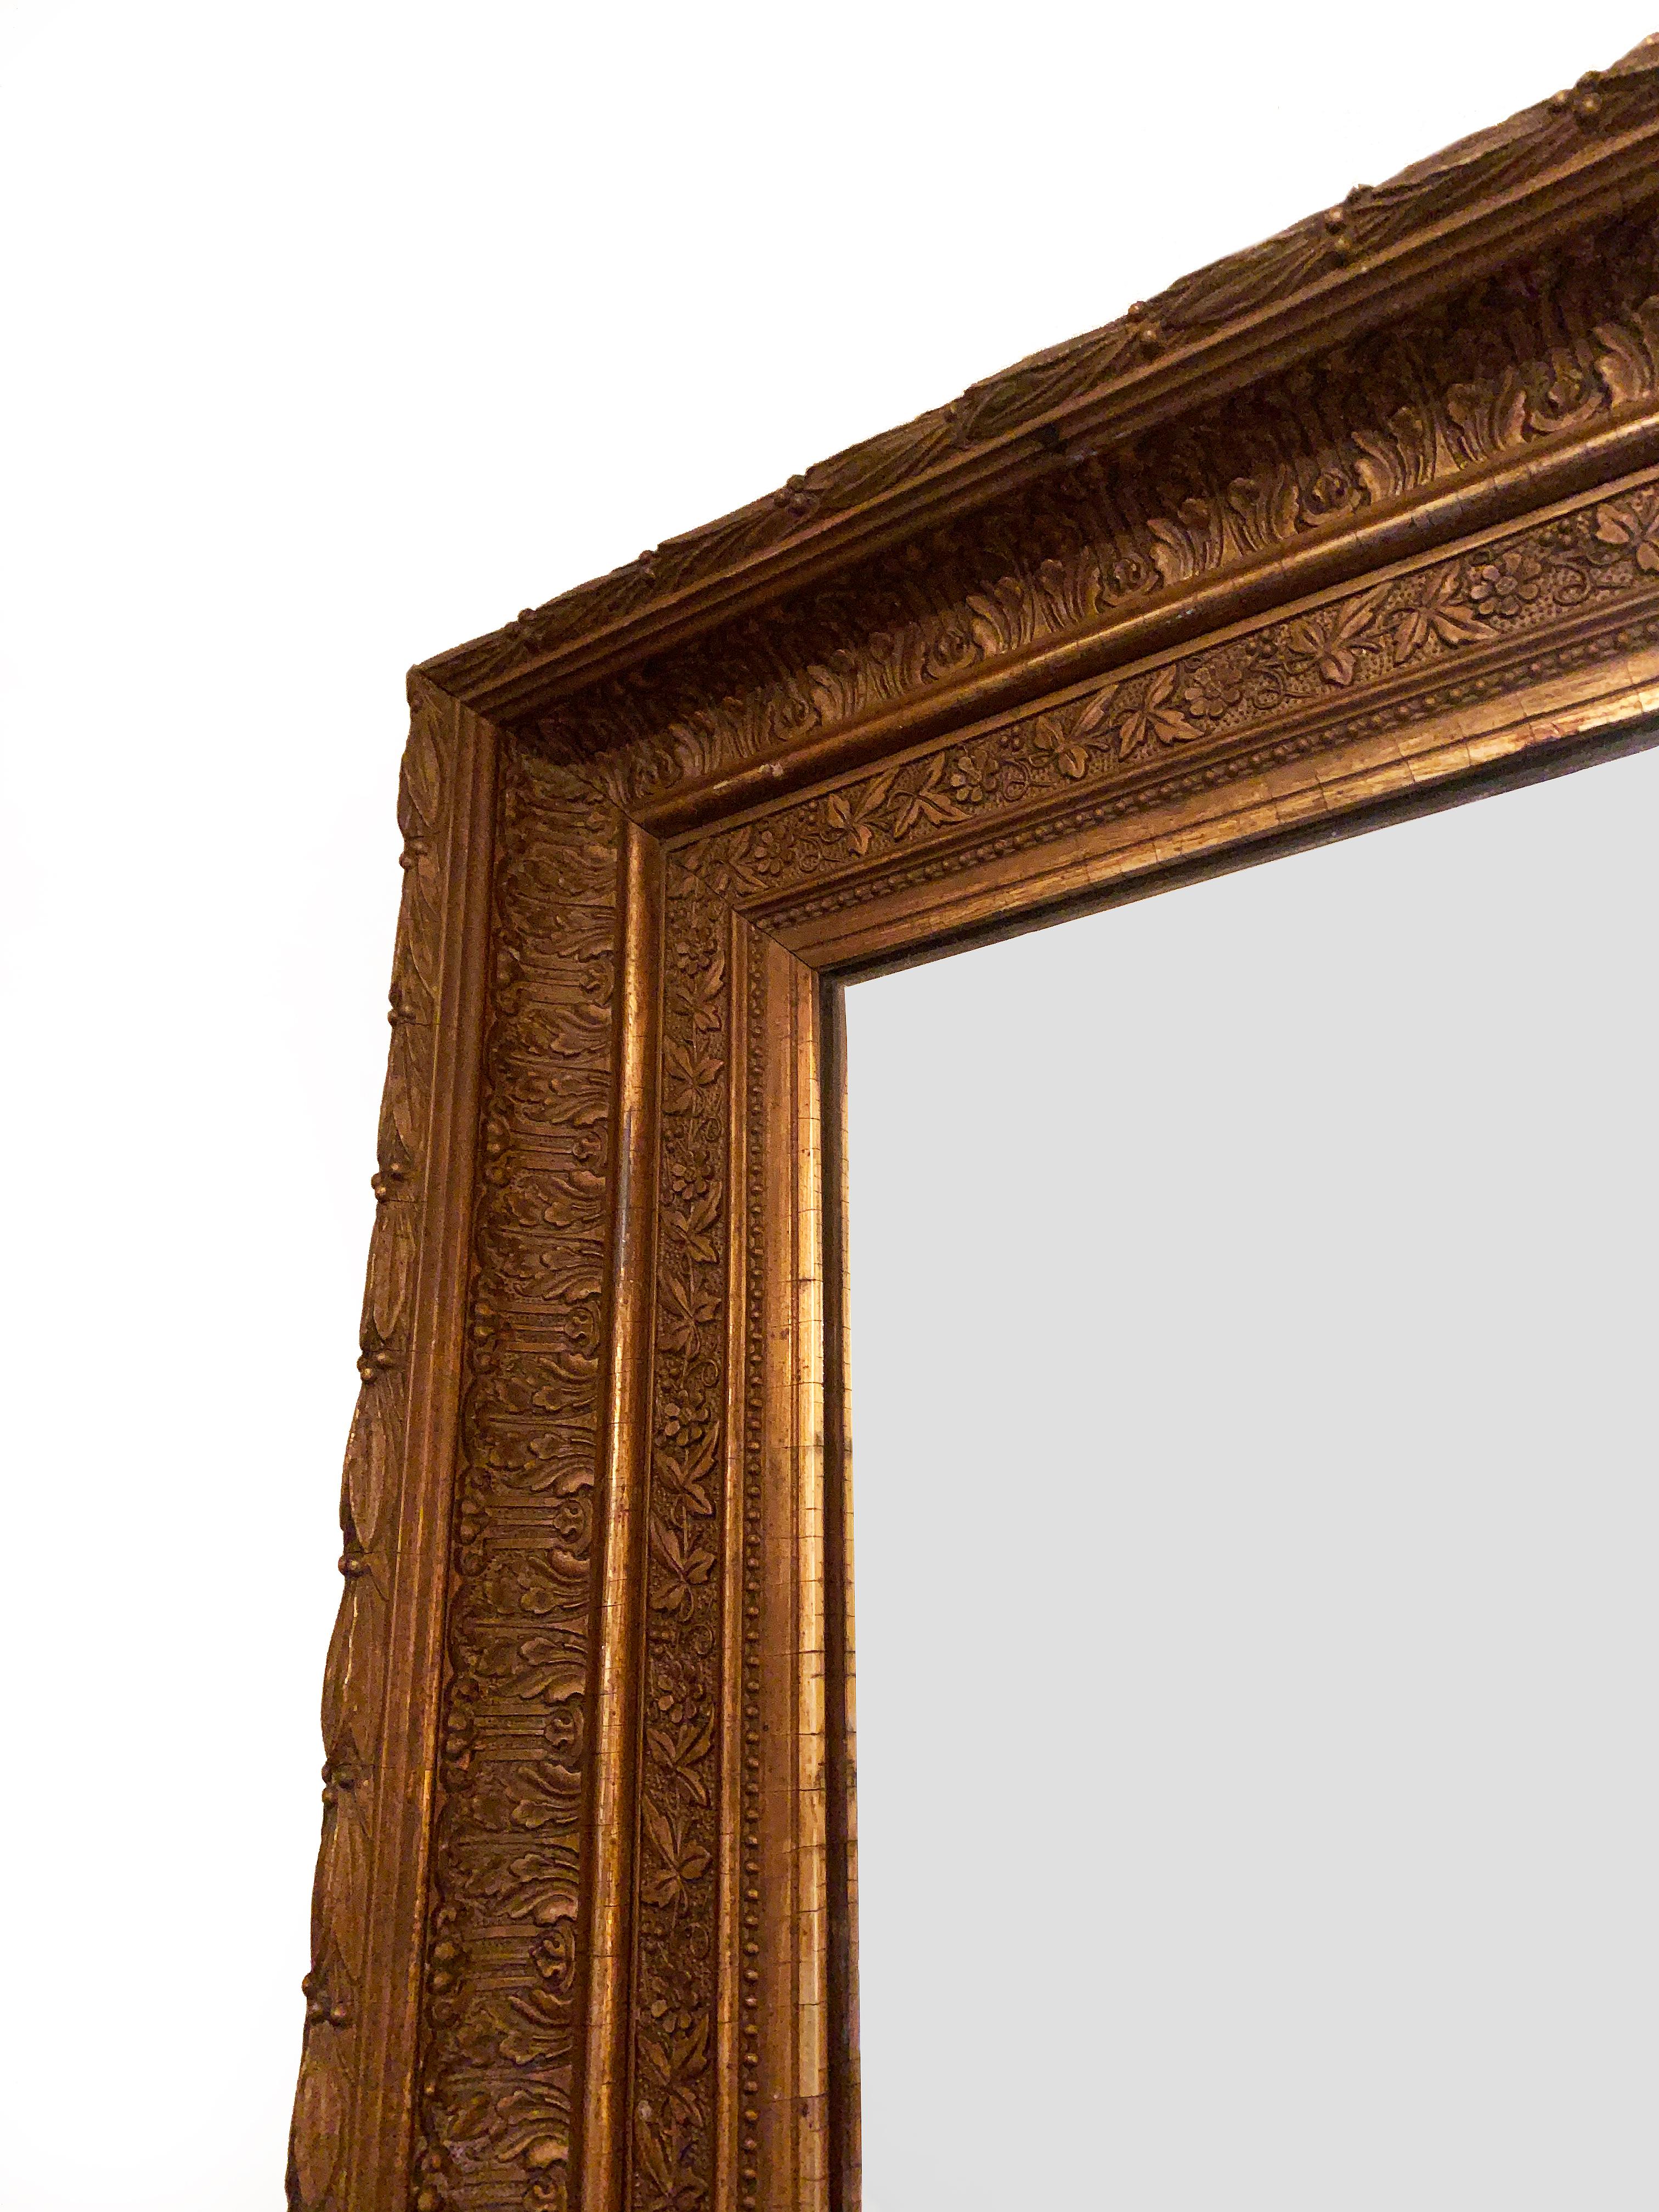 An imposing classical gilded rectangular mirror with a richly decorated cavetto frame. The deeply moulded frame exhibits laurel leaves, acanthus, and a daisy meander. The original mirror plate is retained in good condition.